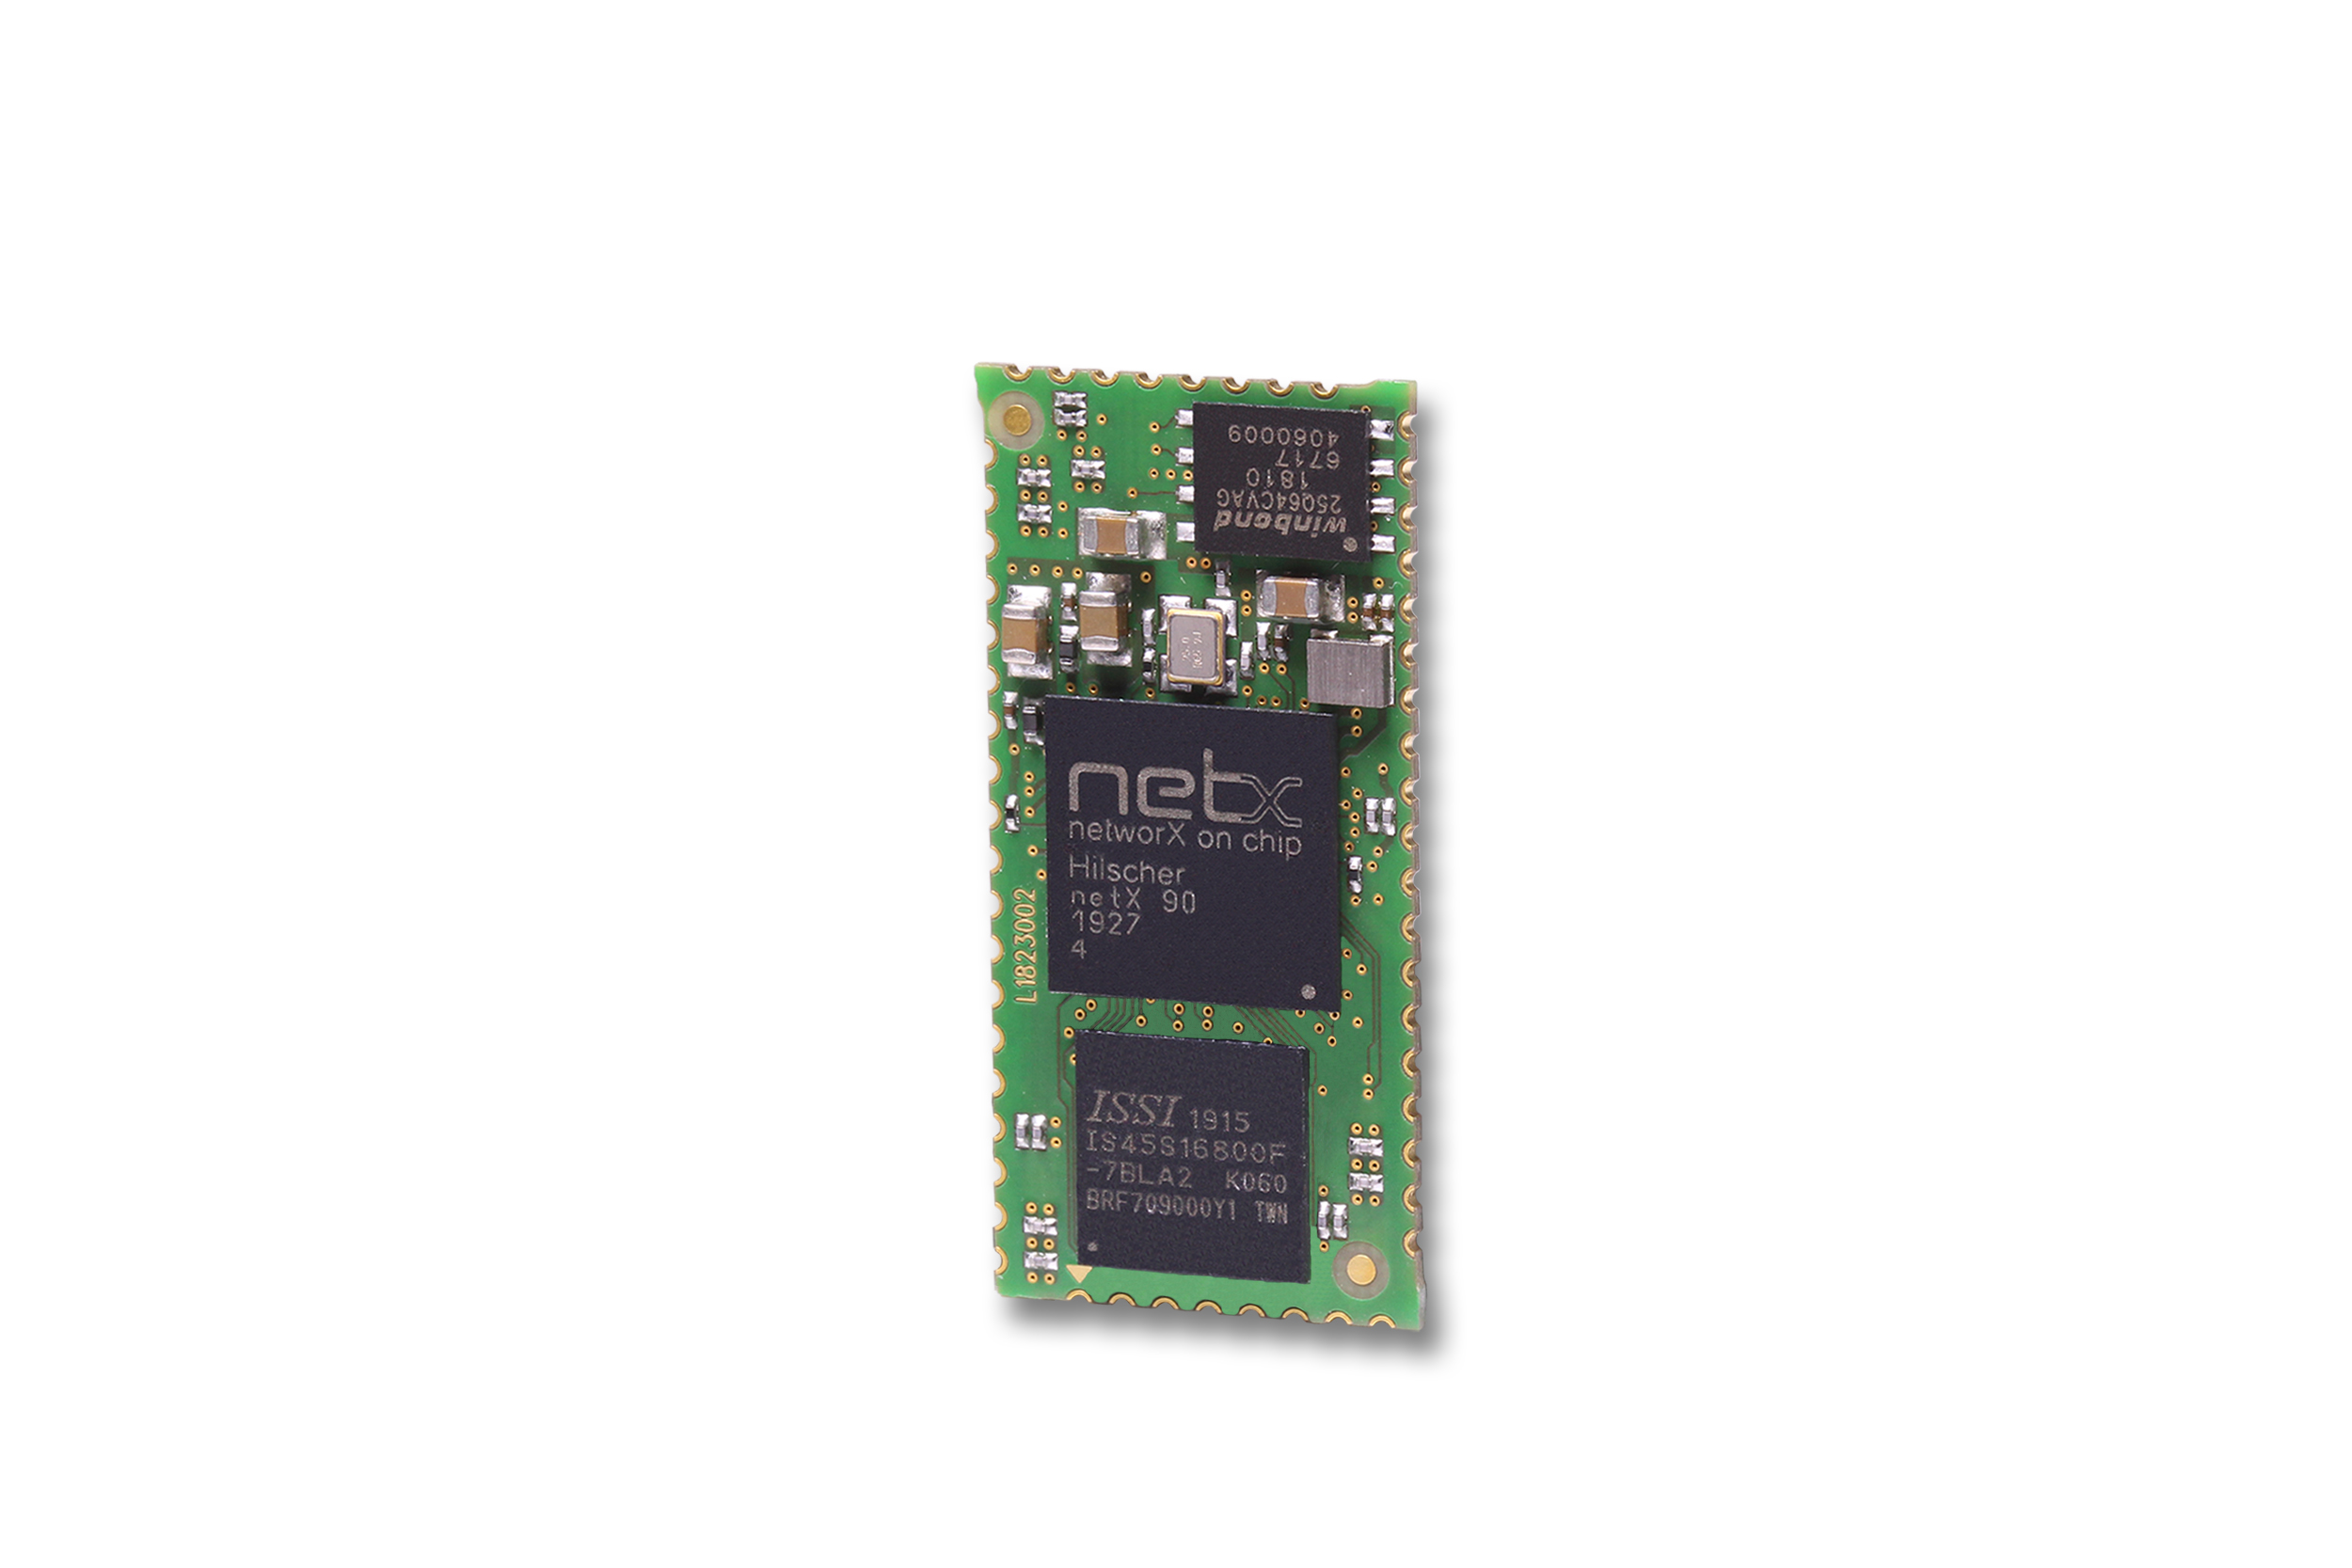 Hilscher’s netX 90, netRAPID H90 and NXHX 90-JATG are designed to accommodate the needs that companies interested in offering CC-Link IE Field Basic compatibility may have, such as cost, time-to-market and production volumes.